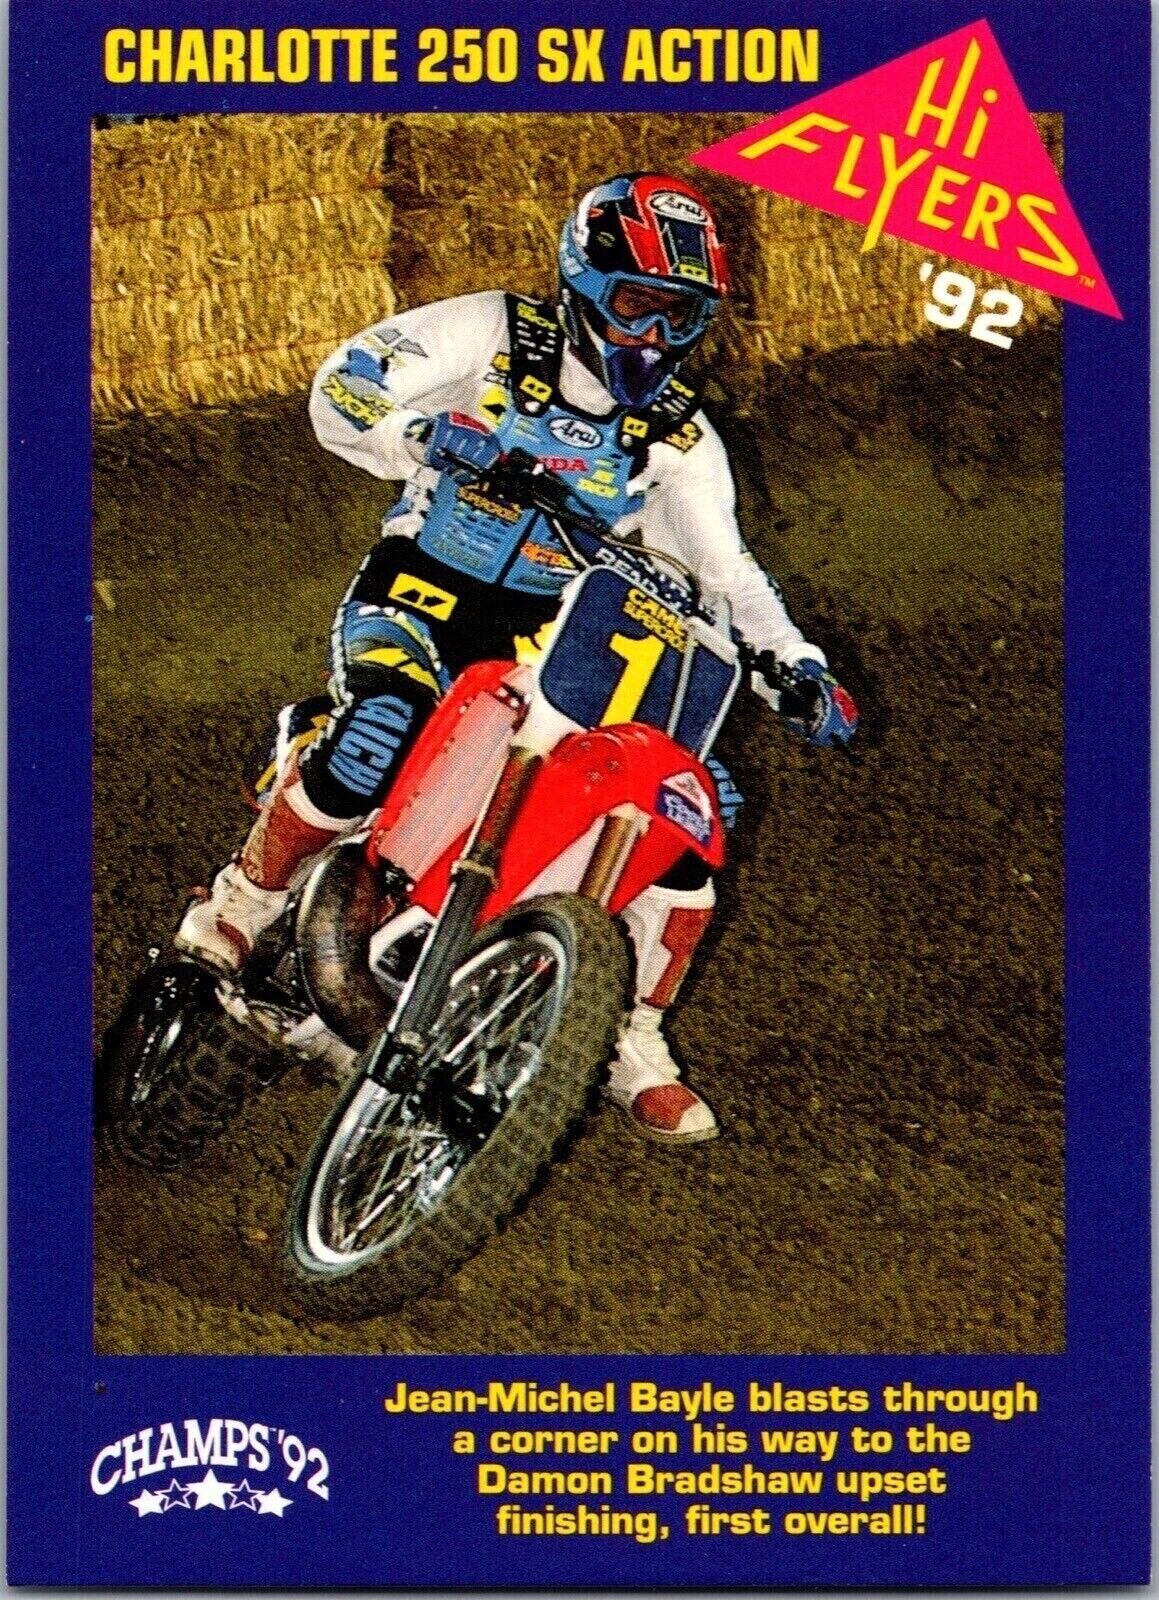 1992 Jean-Michel Bayle and Jimmy Button Charlotte 125 SX Action Hi Flyers CCG